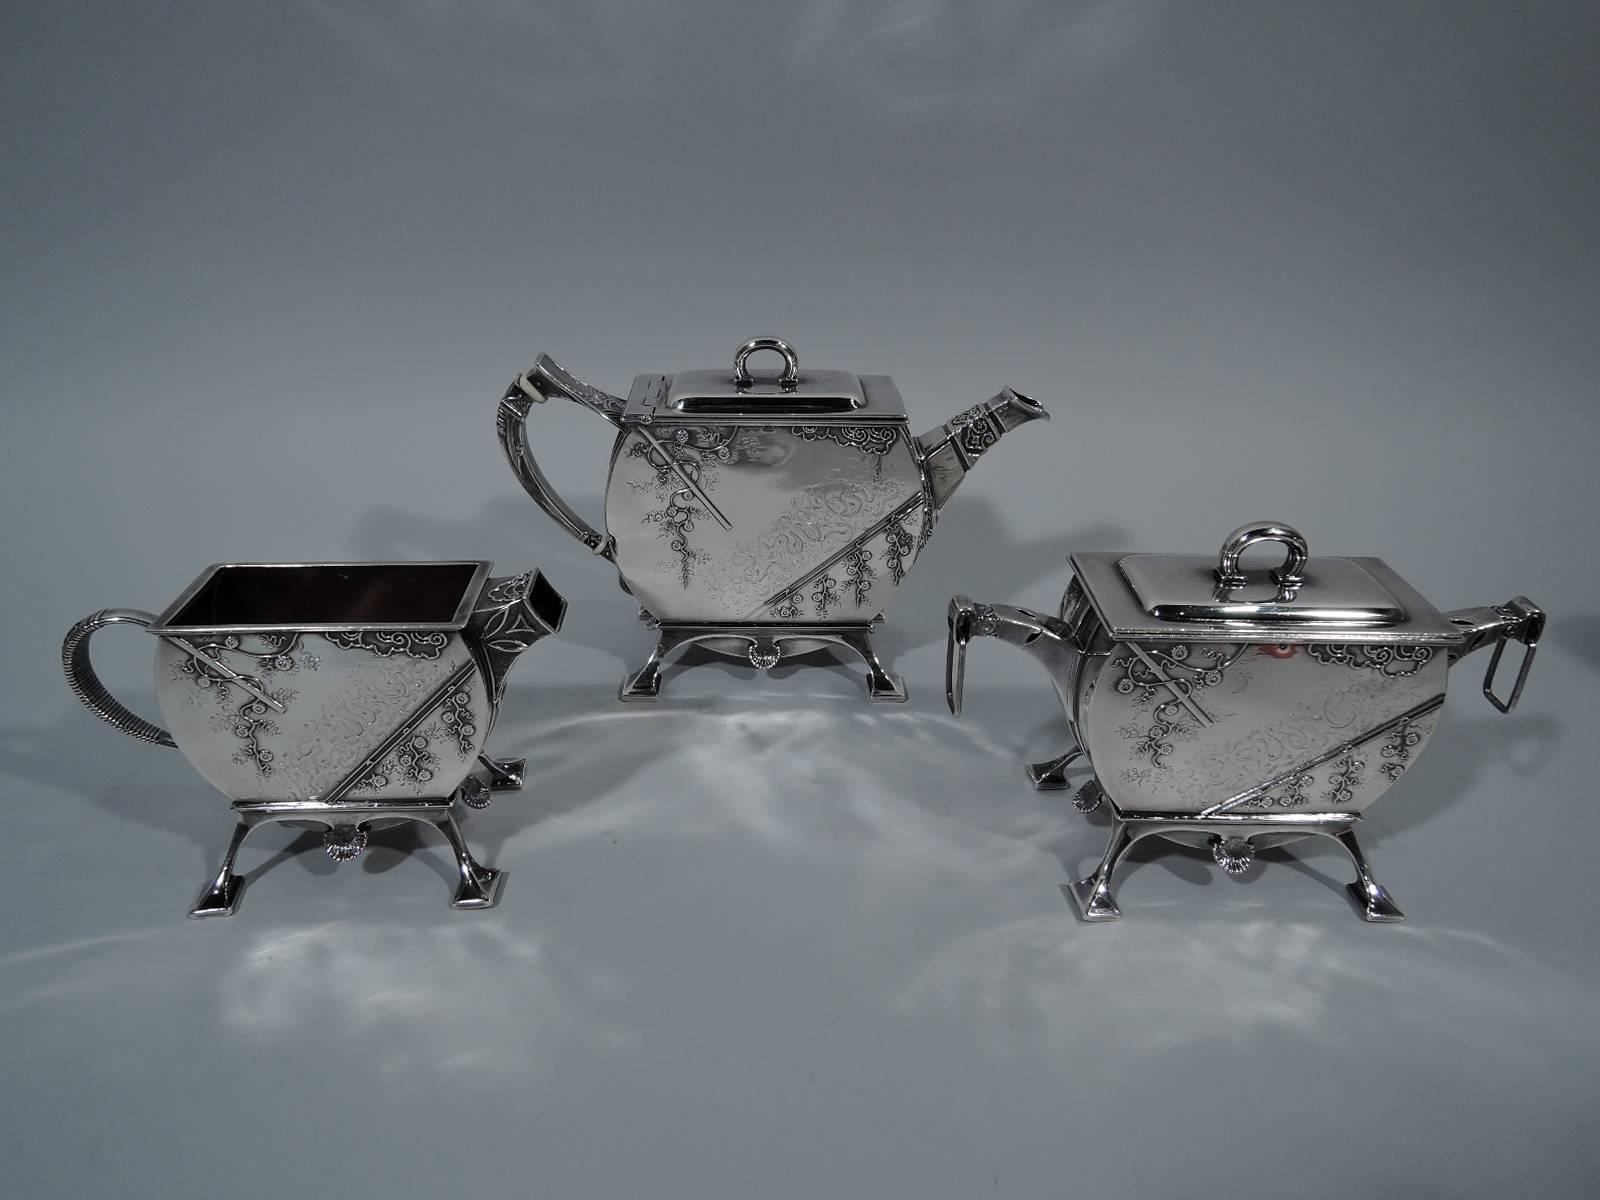 Early Japonesque sterling silver tea set. Made by Tiffany & Co. in New York. This set comprises teapot, creamer, and sugar. 

Each: Flat sides with curved ends and bottom set in four-legged frame with block feet. Teapot and sugar have flat cover